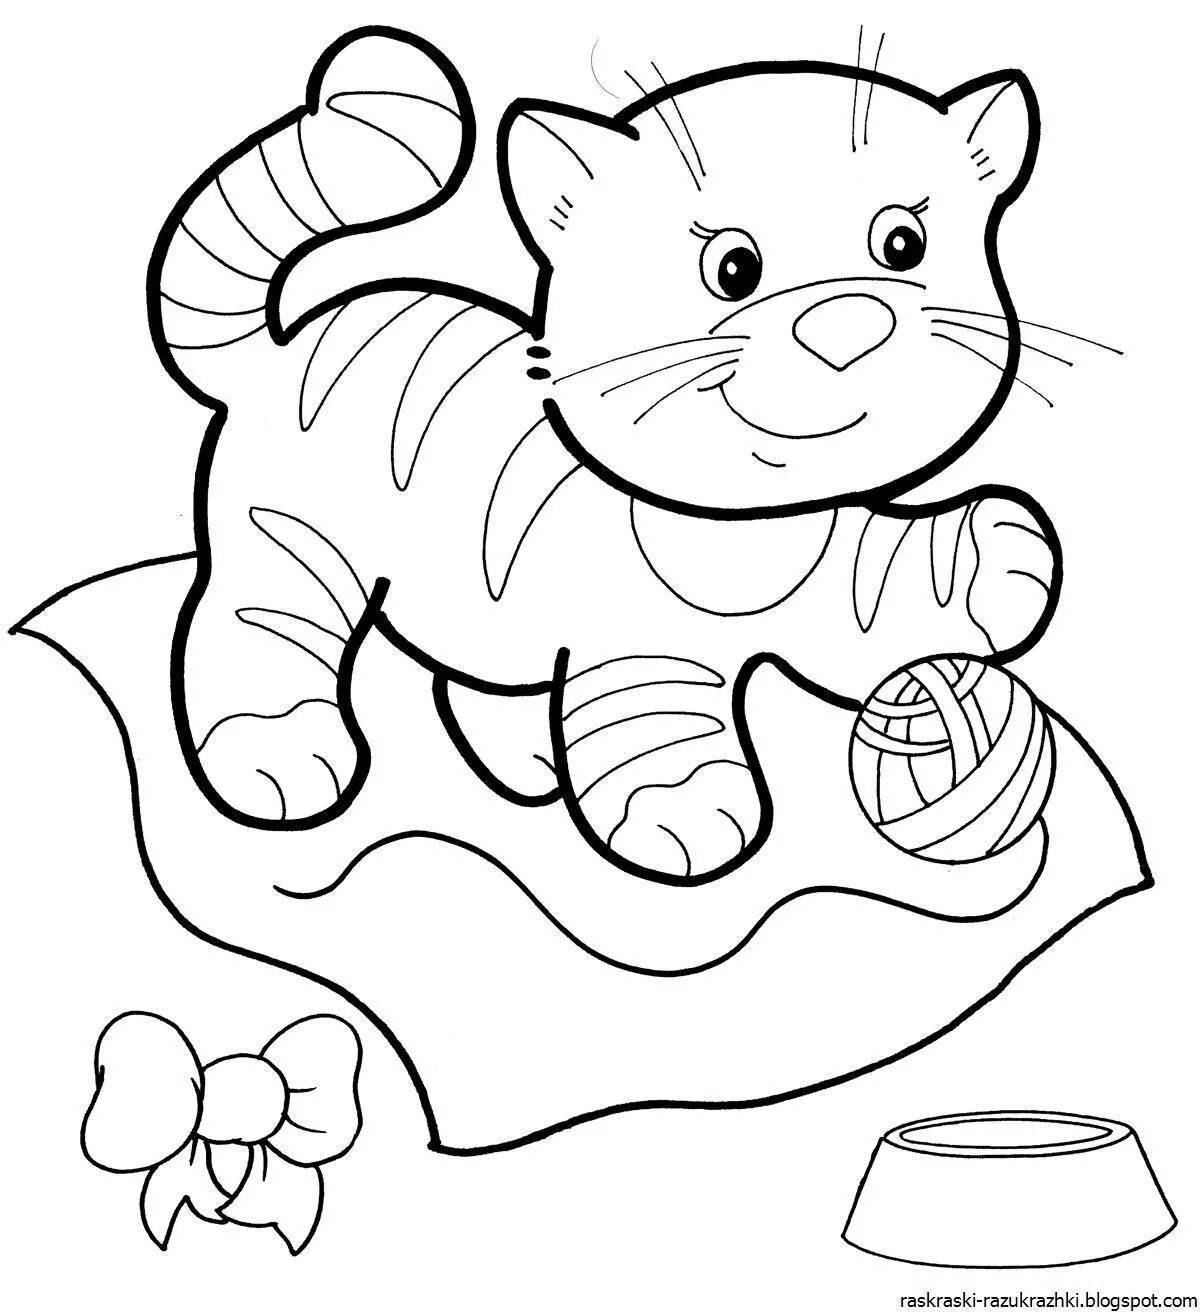 Artistic coloring of a kitten for children 2-3 years old